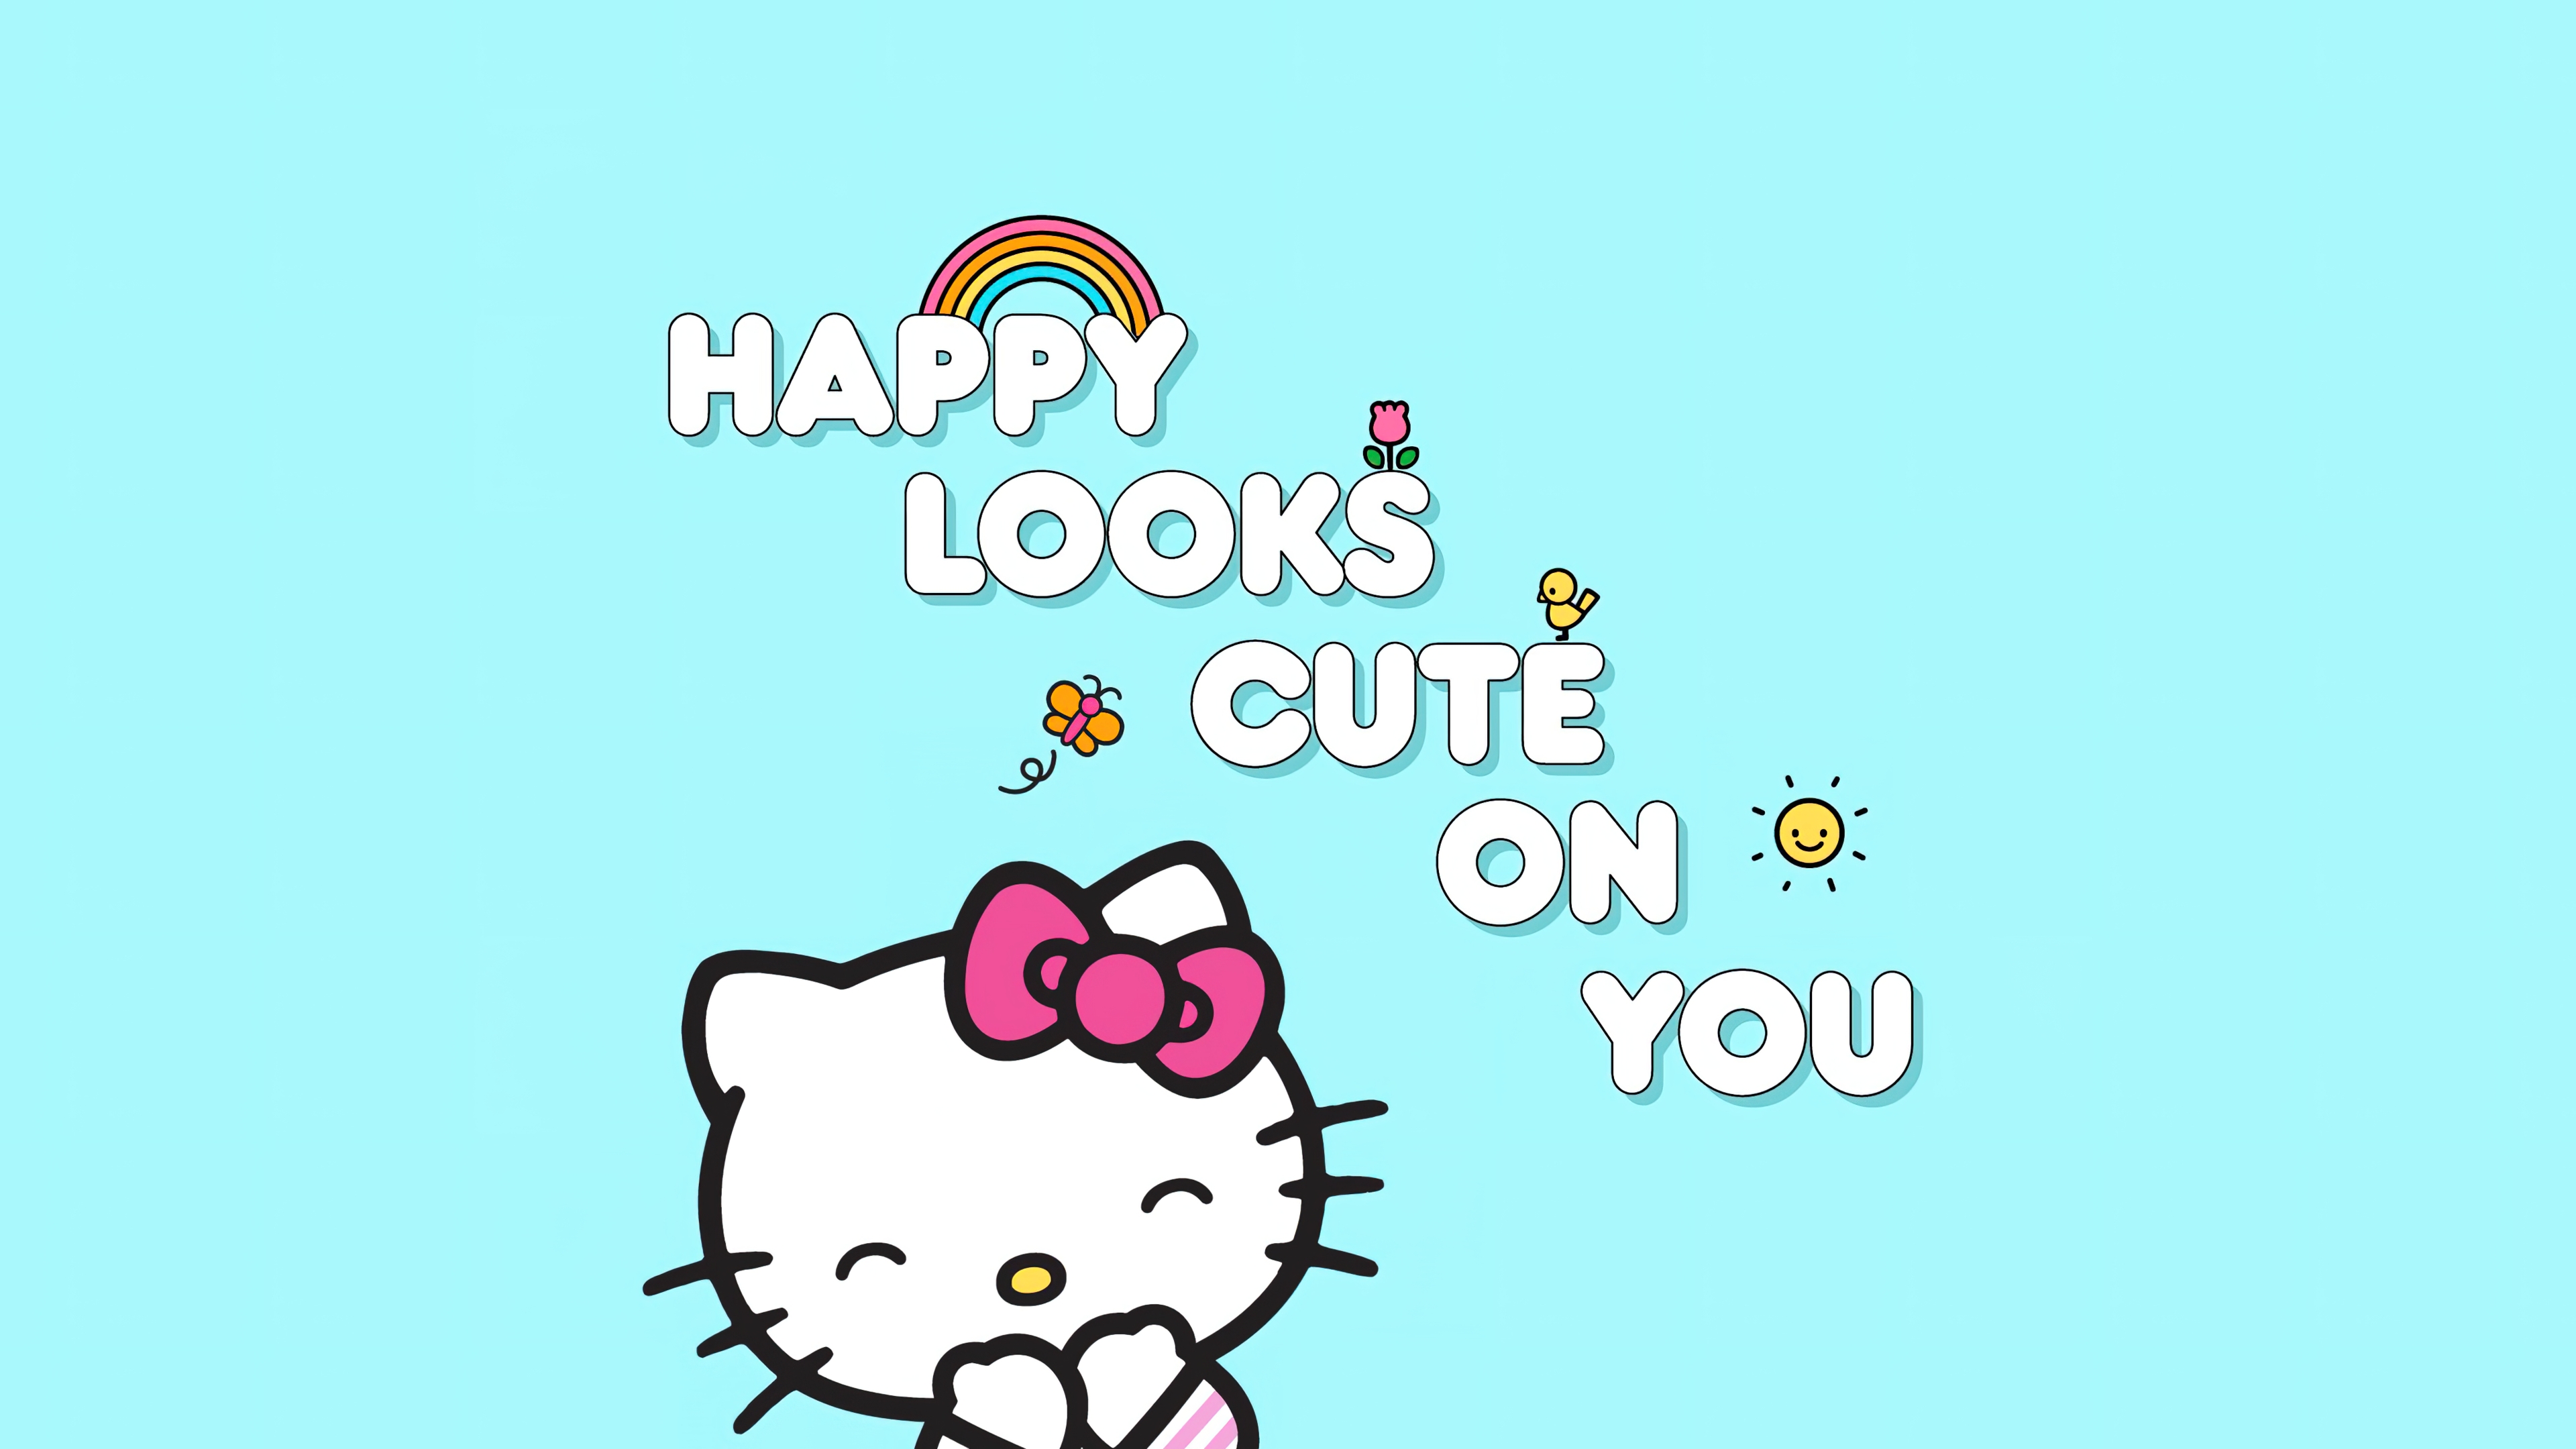 HD wallpaper, Cyan Background, Hello Kitty Background, Sanrio, Happy Looks Cute On You, Hello Kitty Quotes